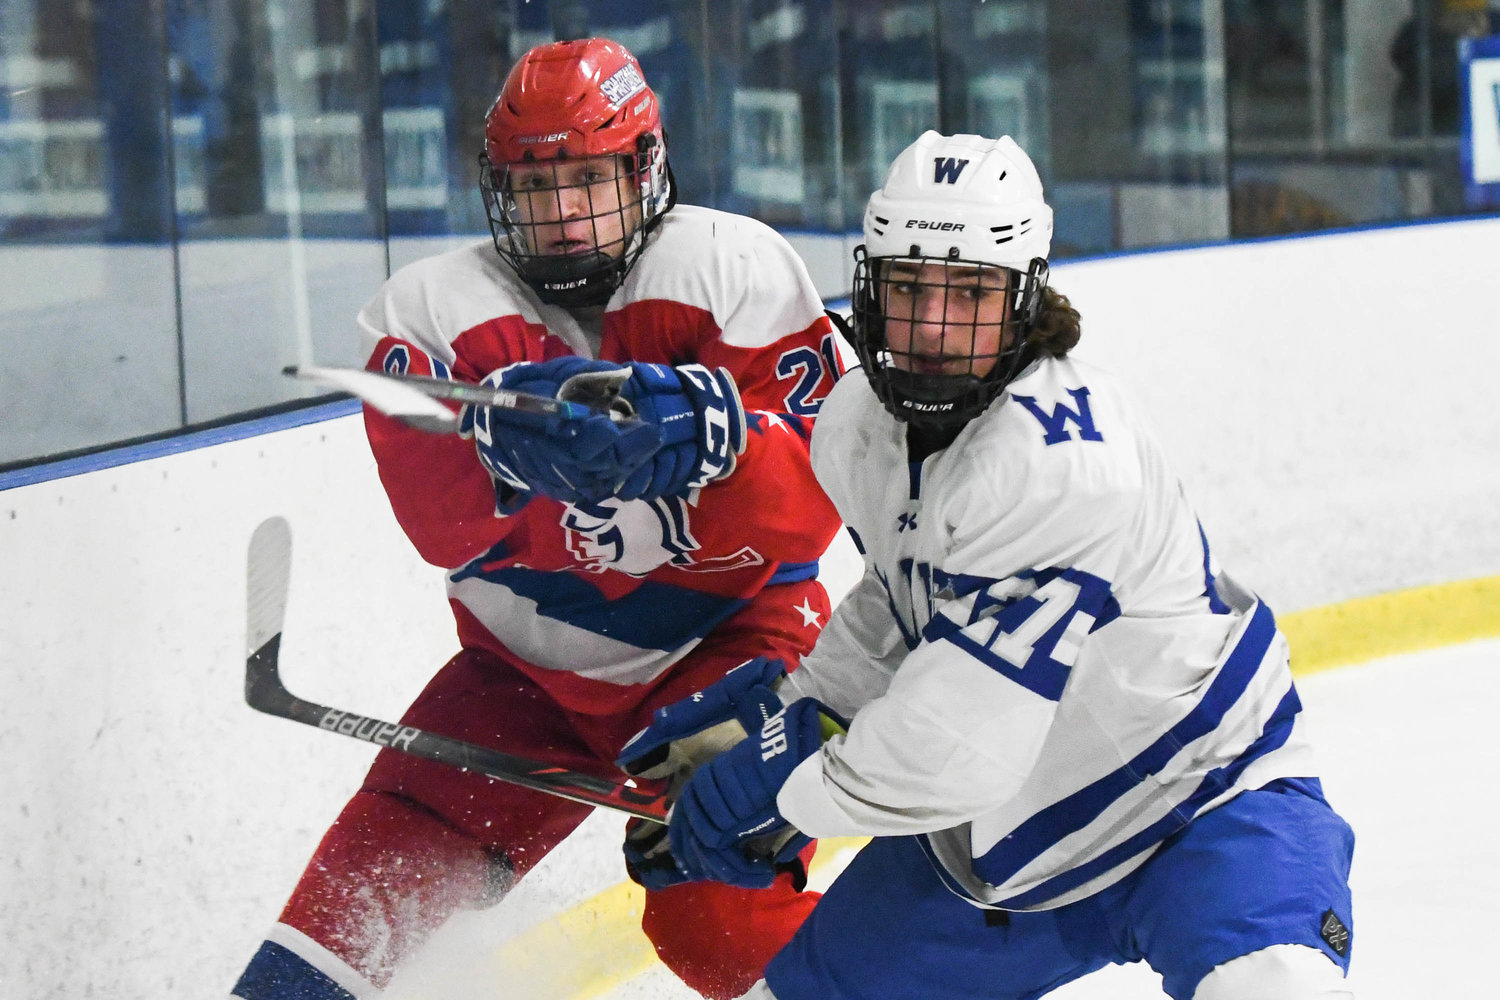 From left, New Hartford player Gabriel Syrotynski clears the puck away from Whitesboro player John Welch during the game on Tuesday, Feb. 8.